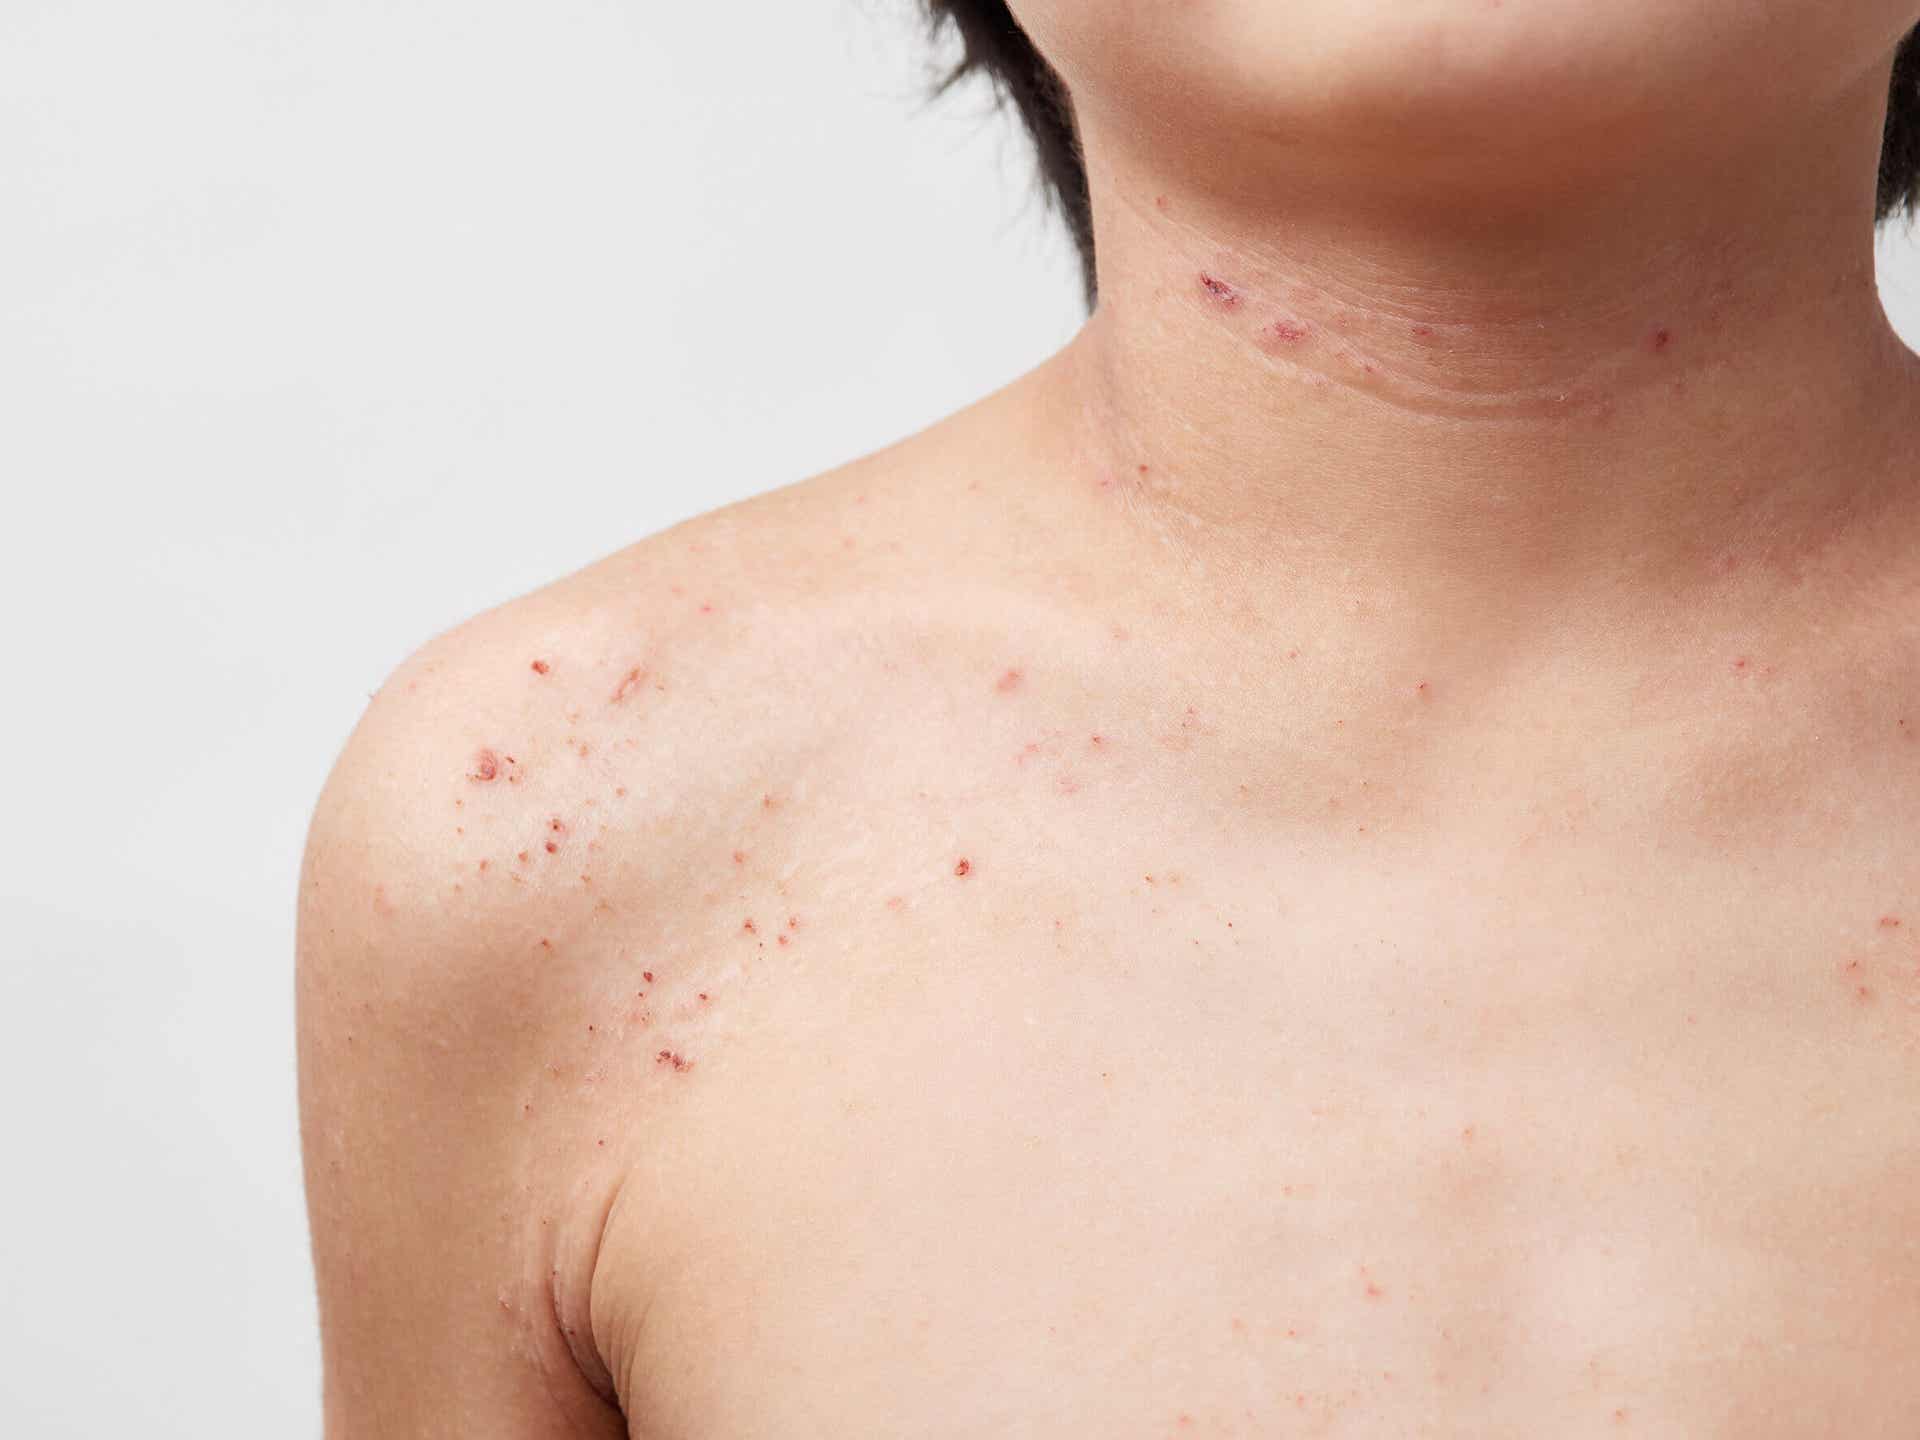 A young boy with atopic dermatitis on his neck and shoulders.